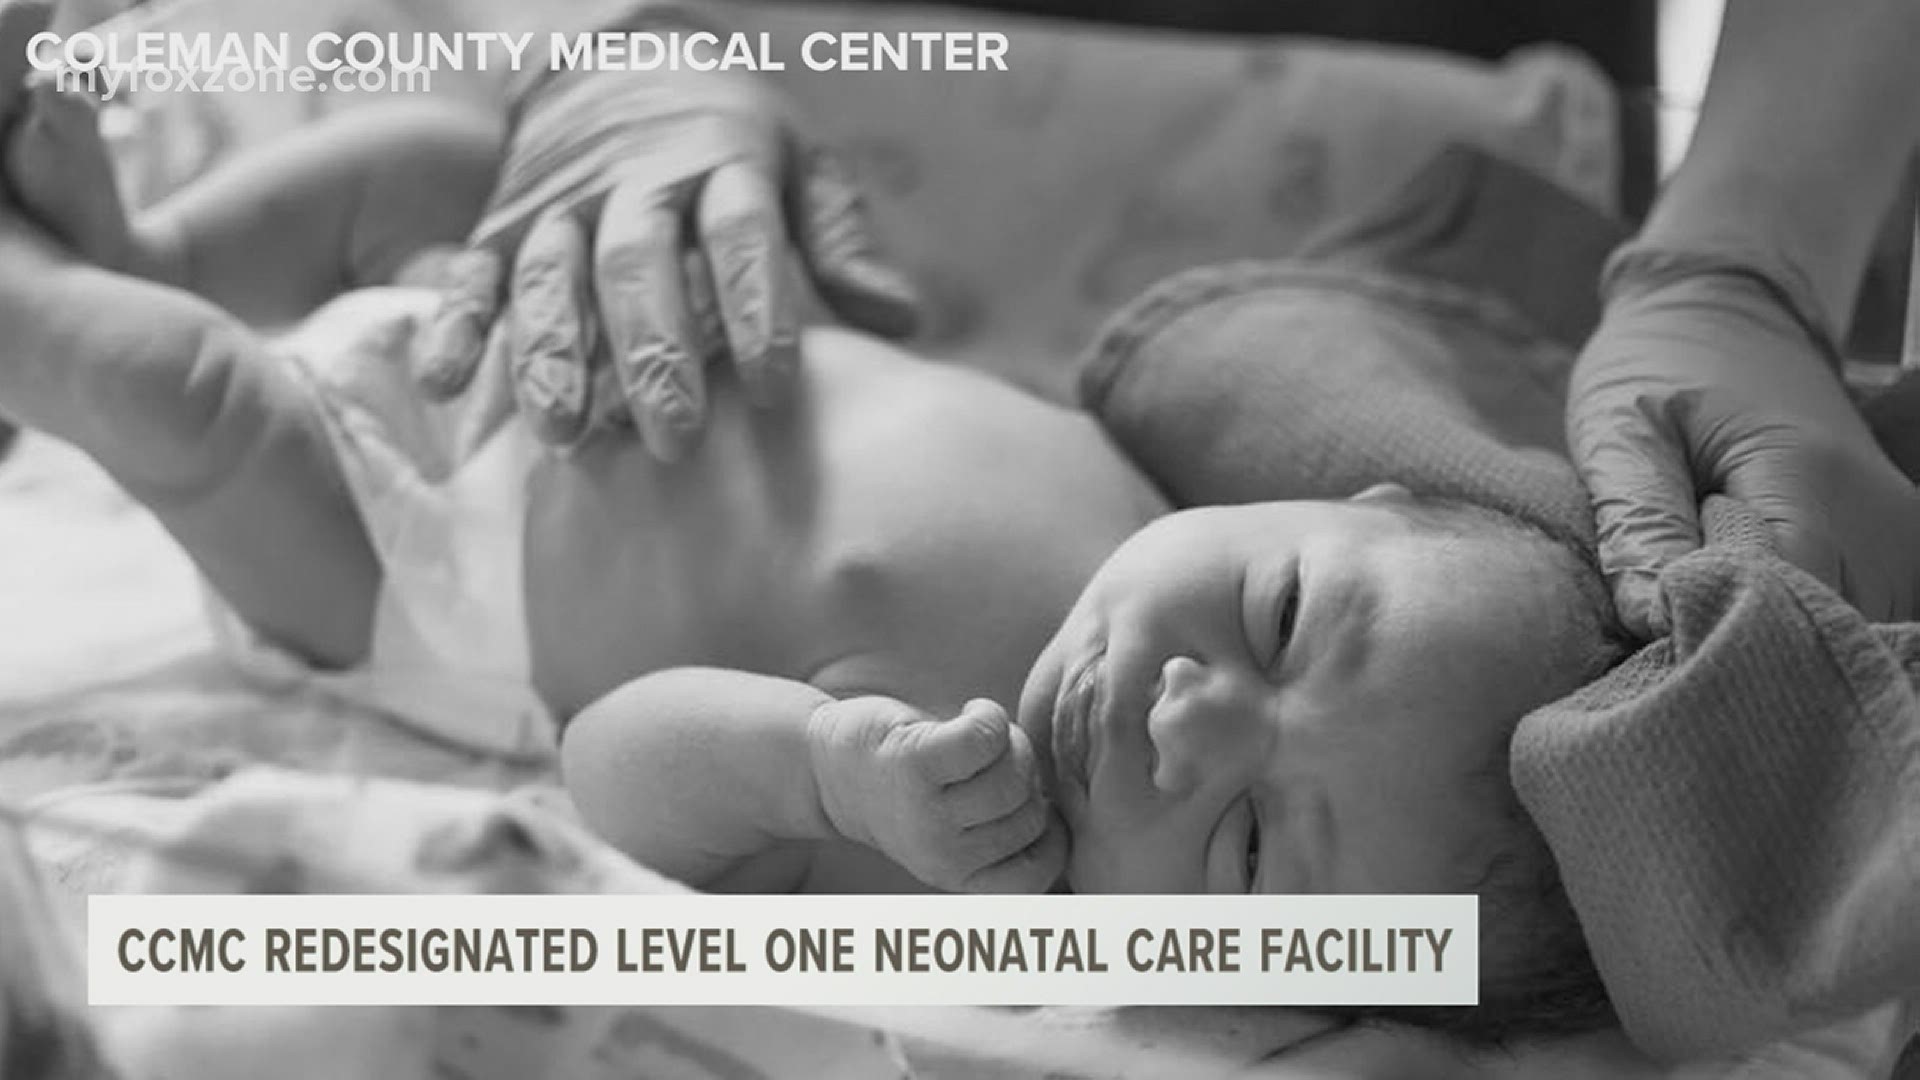 According to CCMC officials, facility doctors are committed to giving care to patients from birth to death.